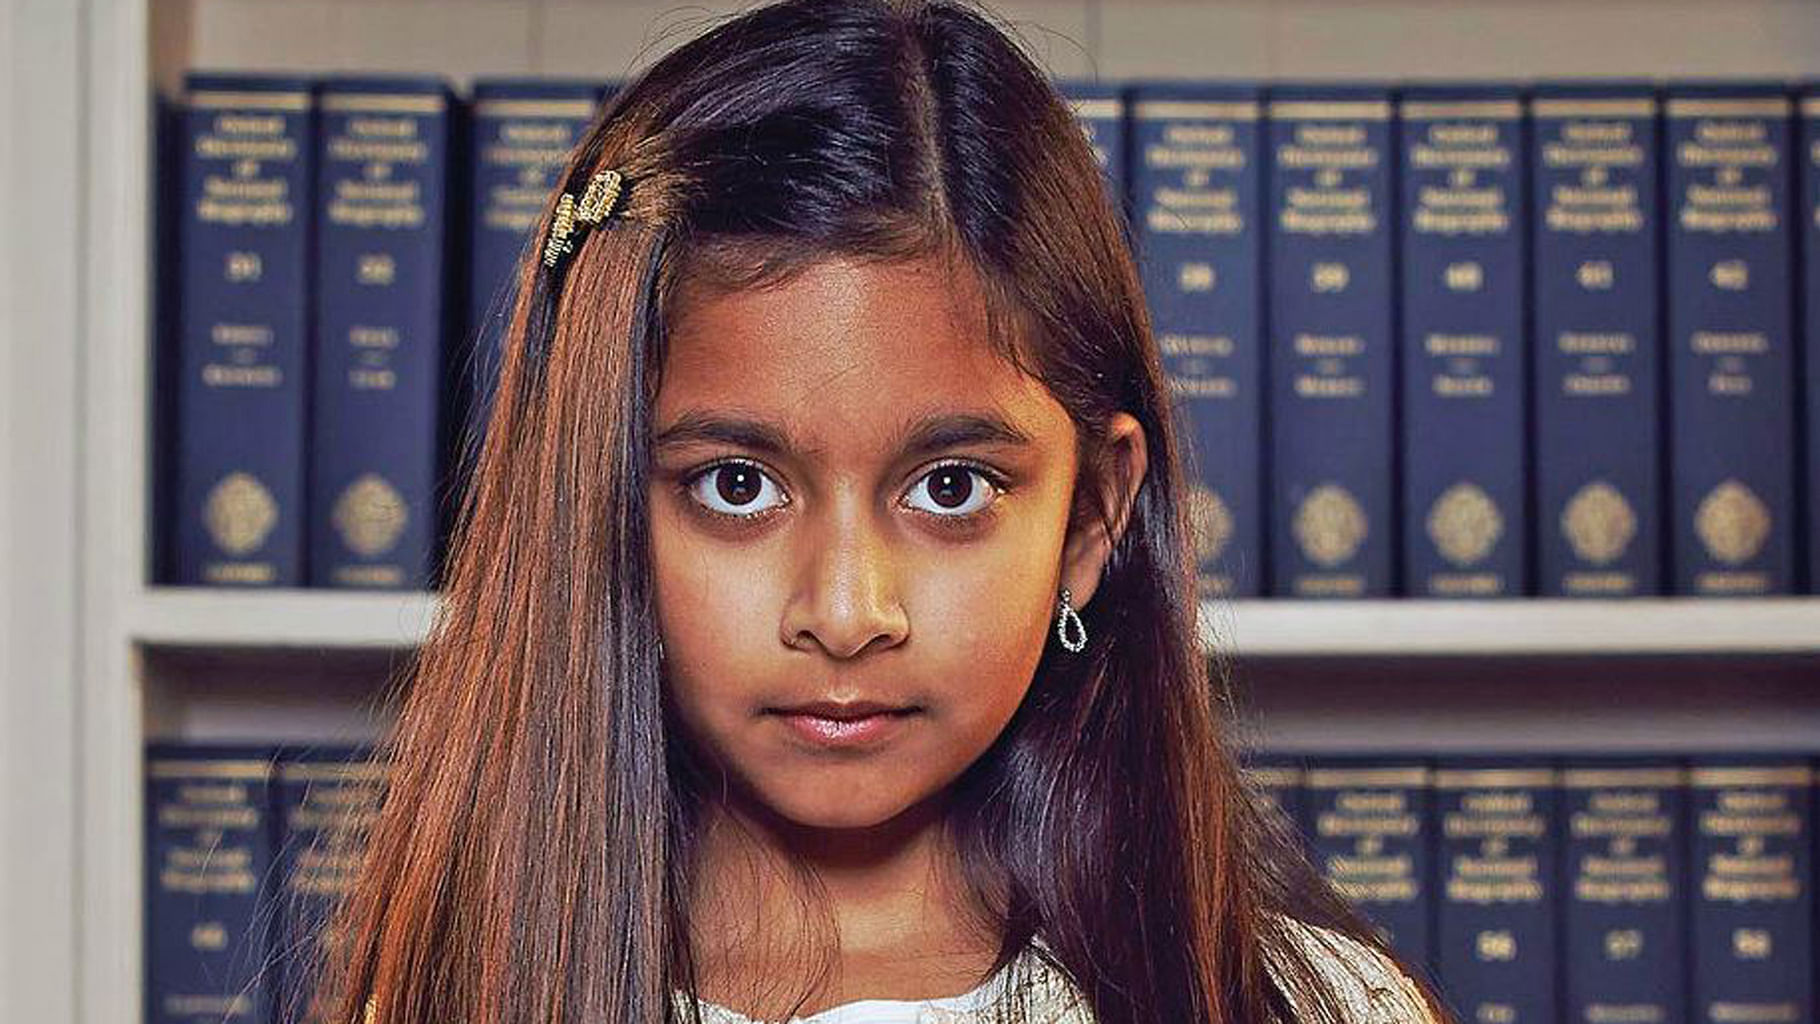 Rhea shot ahead in Tuesday’s final of ‘Child Genius 2016’ aired on Channel 4 with six correct answers. (Photo Courtesy: <a href="http://www.channel4.com/programmes/child-genius/on-demand/63008-003">Channel 4</a>)